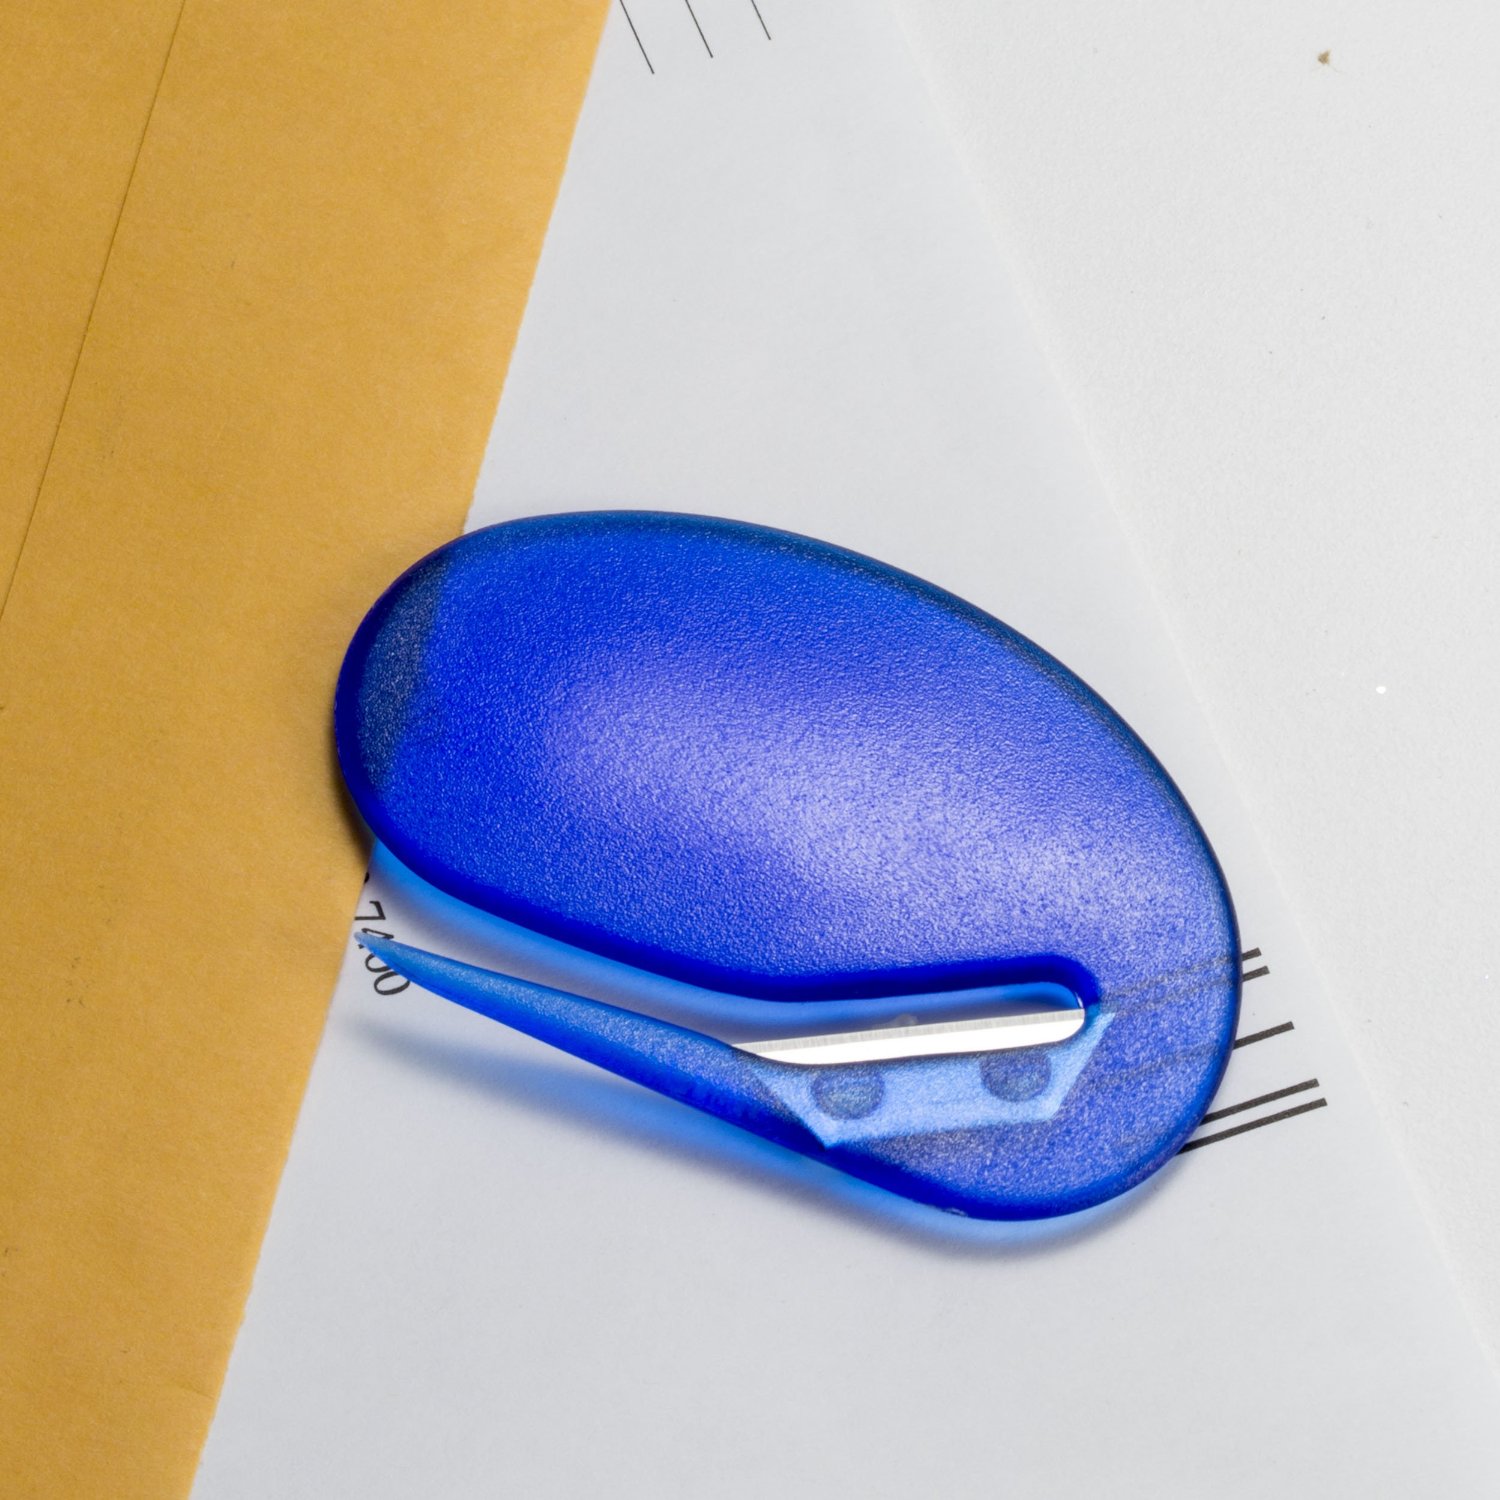 Safe and reliable to meet all your envelope opening requirements
